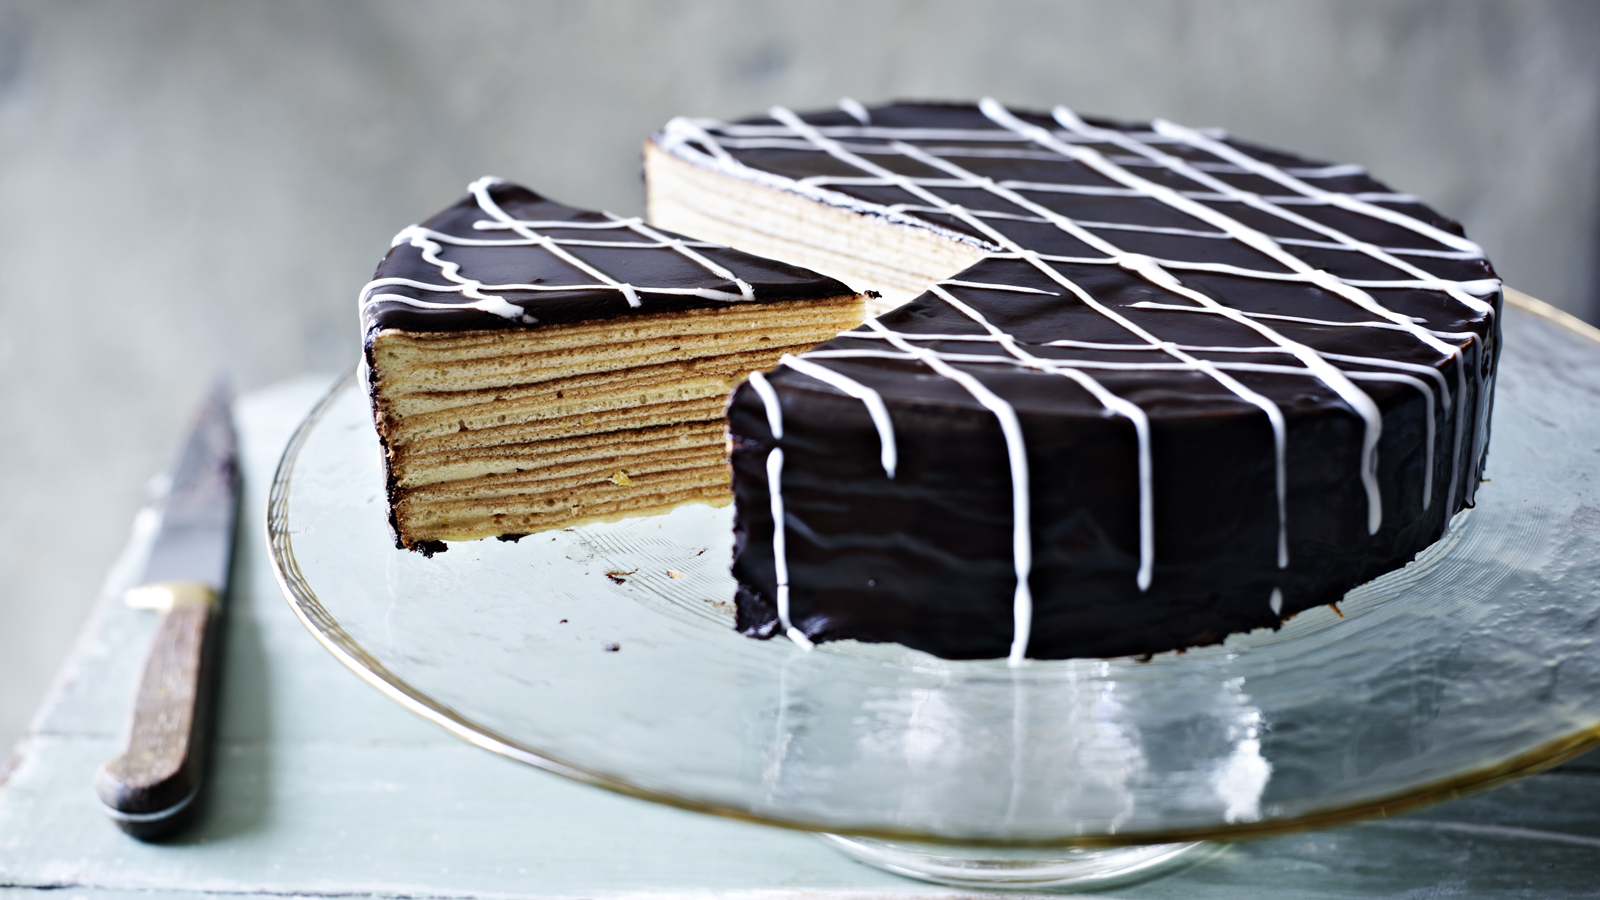 Coconut Layer Cake - Sweetly Cakes With Raffaello and chocolate drip